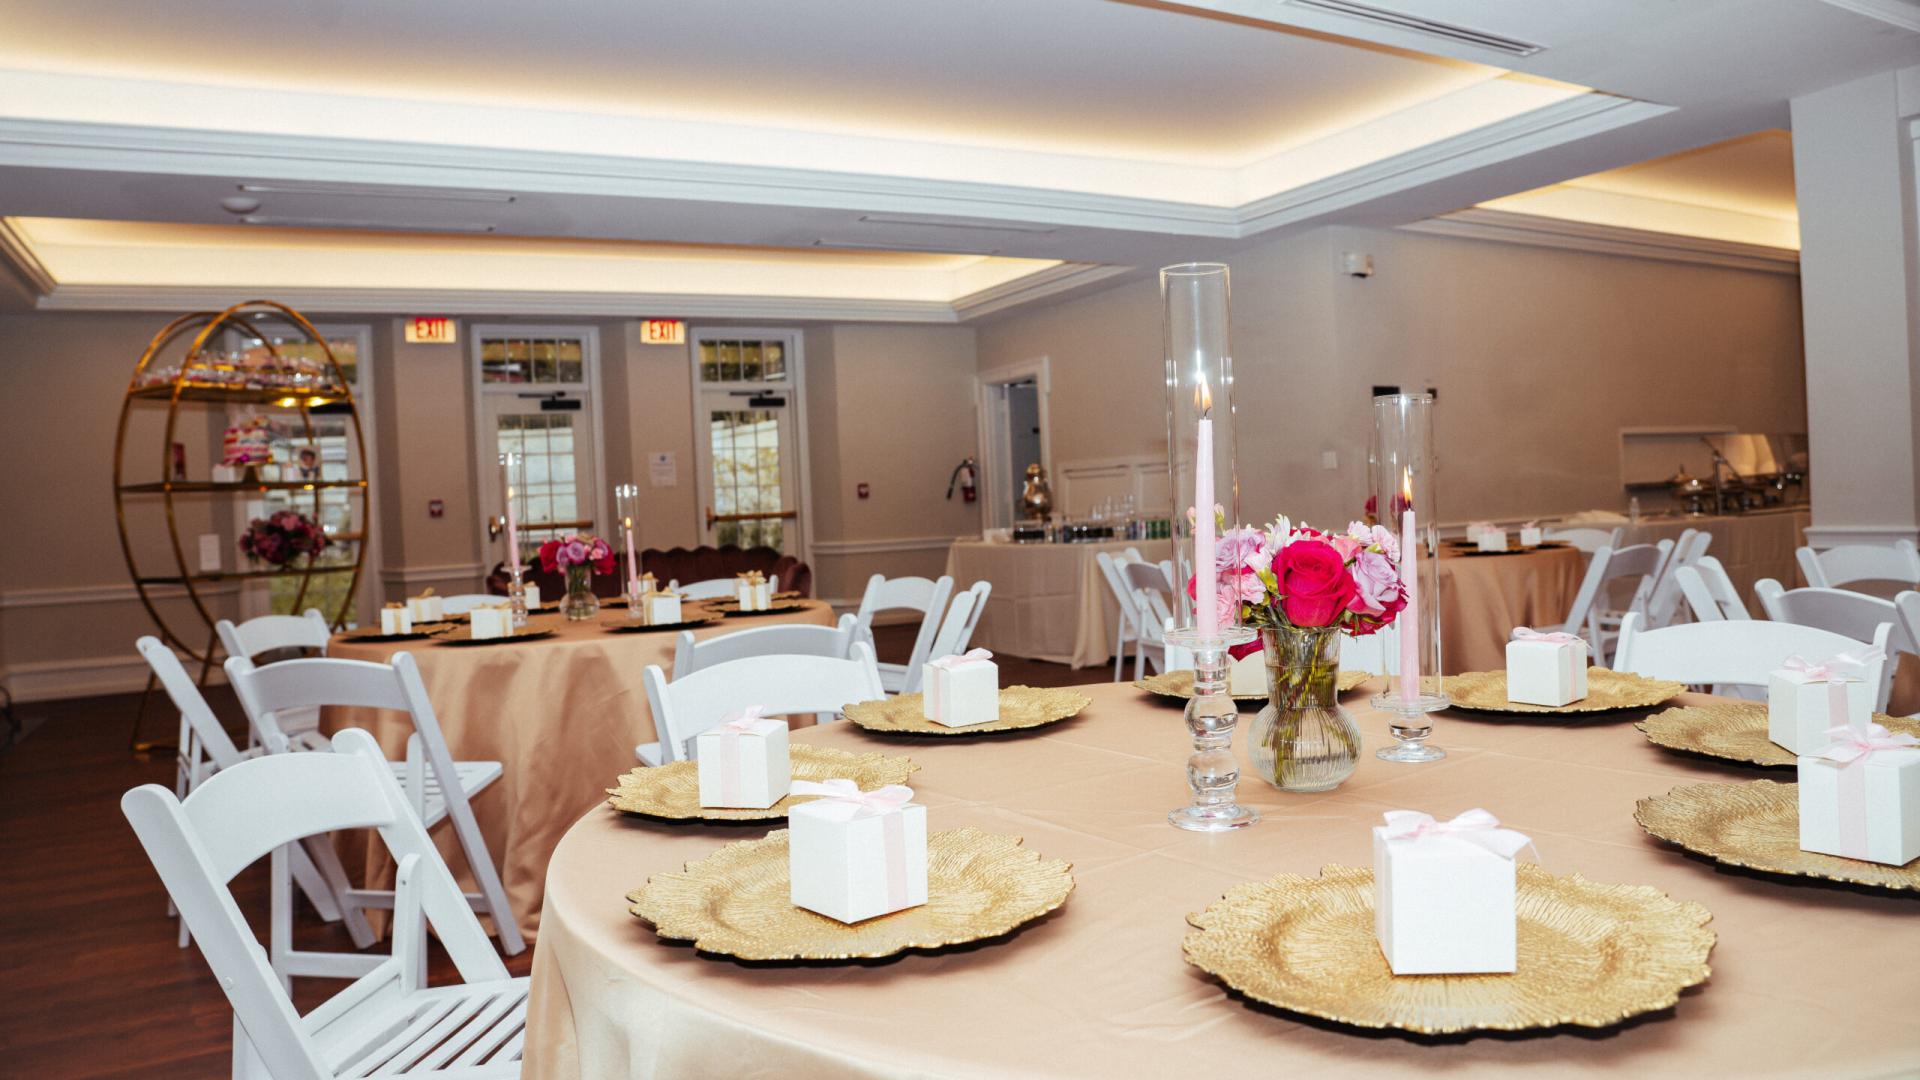 Charity Event Venues for Rent in Washington, DC